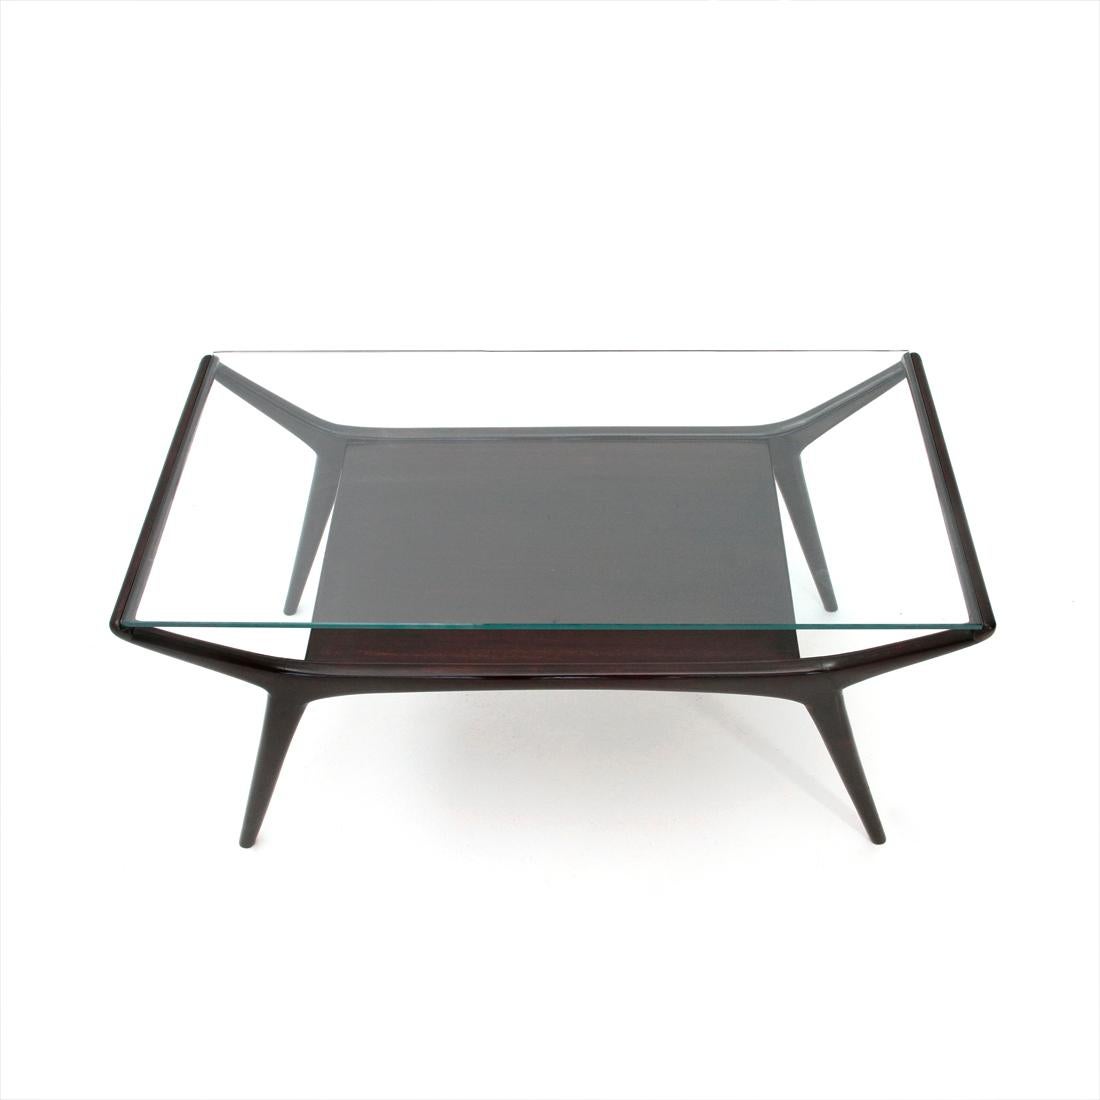 Elegant coffee table of Italian manufacture produced in the 50s.
Ebonized wooden structure.
Lower floor in ebonized wood and glass top.
Good general conditions, some signs due to normal use over time.

Dimensions: Length 83 cm, depth 43 cm,